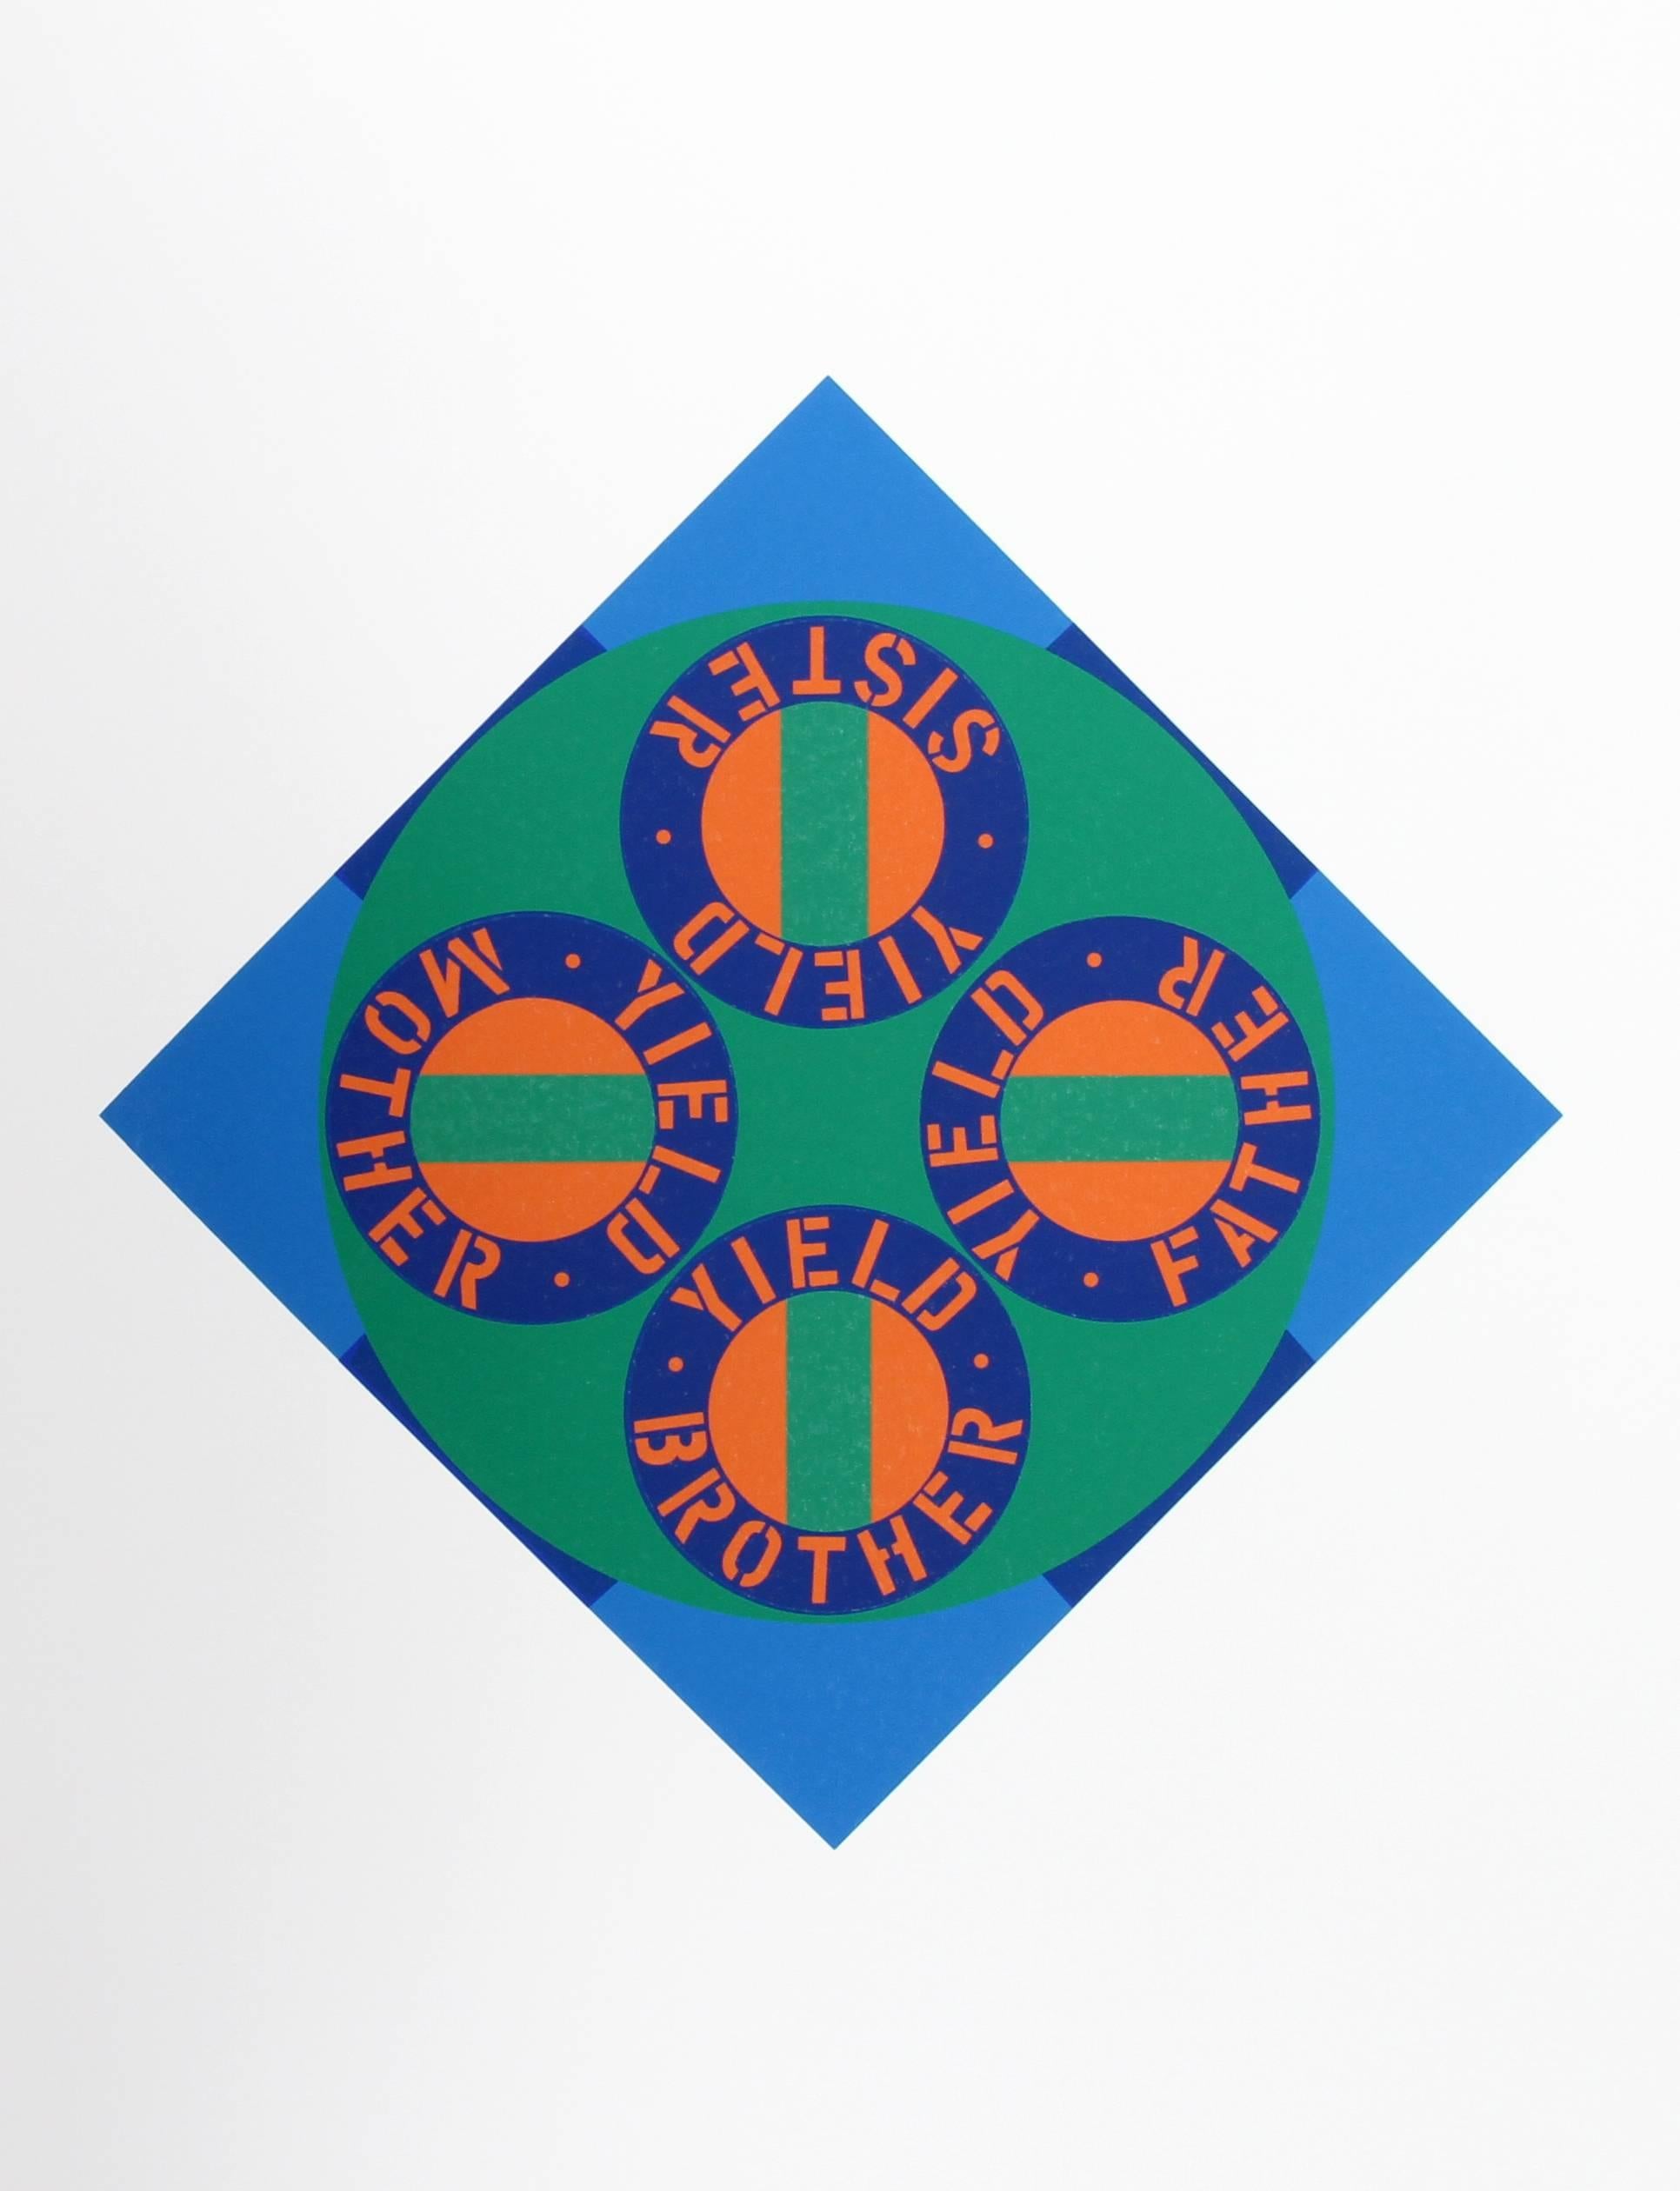 Robert Indiana, "Yield Brother #2", Serigraph from the American Dream Portfolio